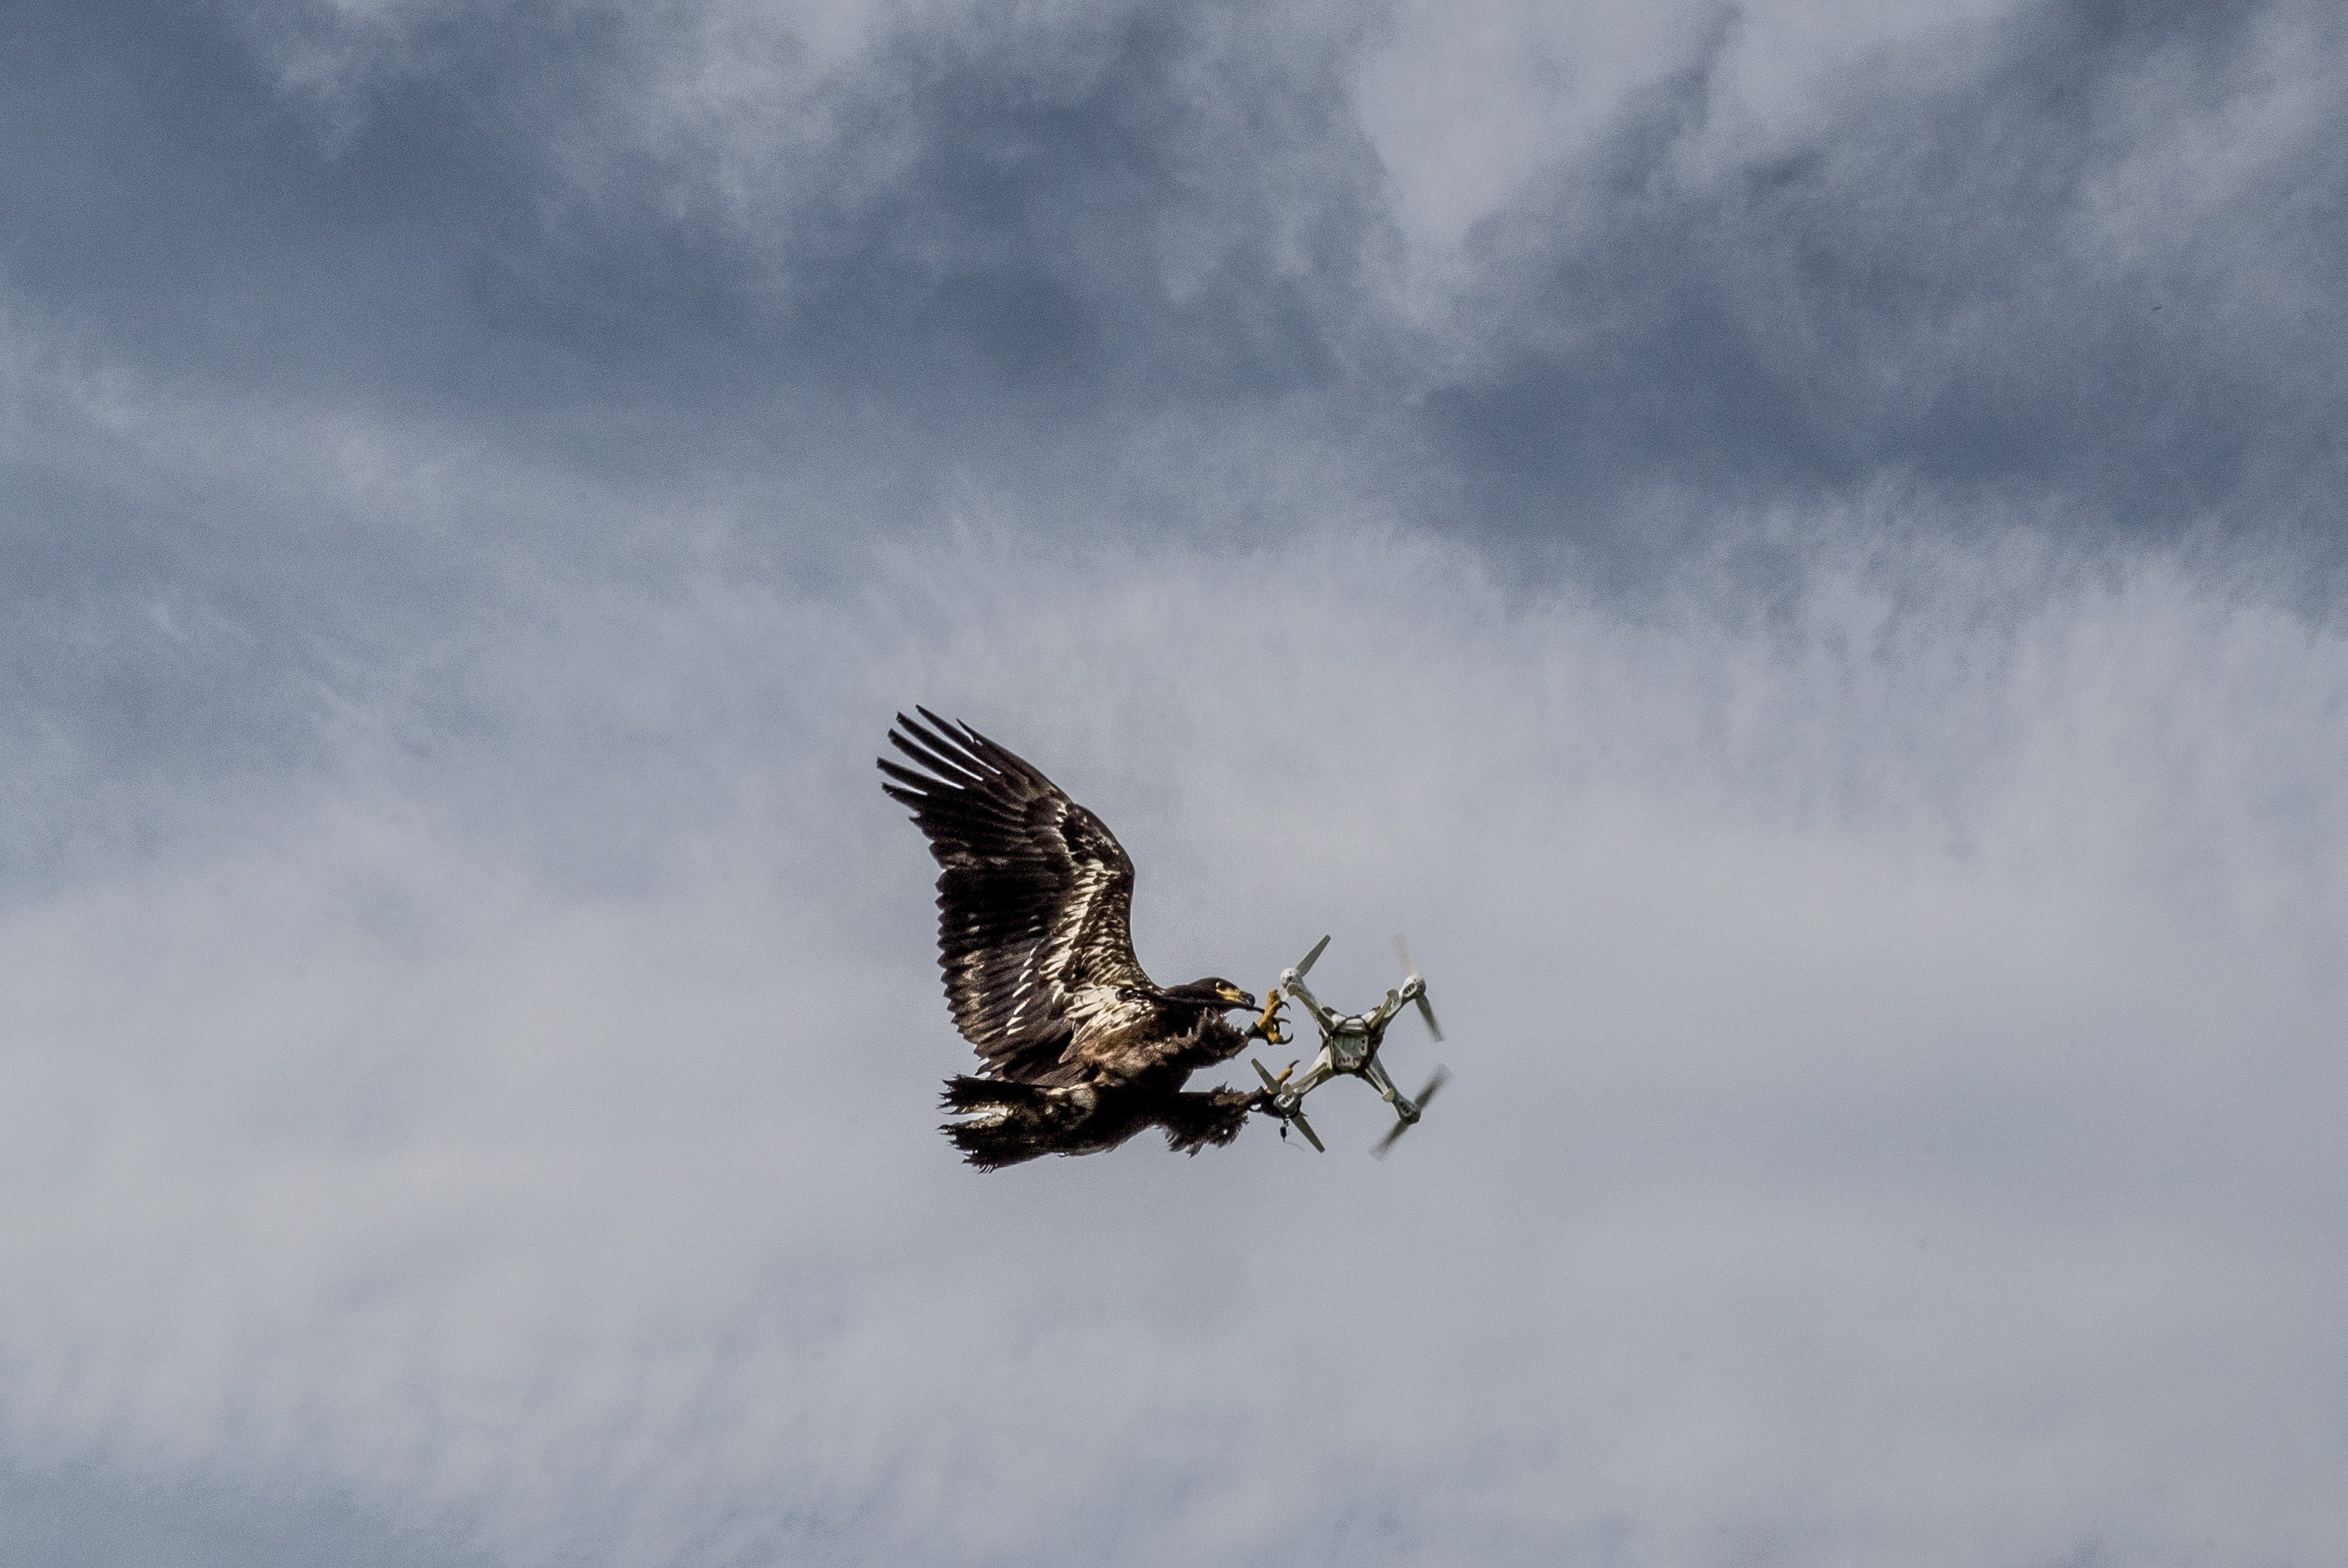 An eagle from Guard From Above, a security company training eagles to intercept drones, tackles a drone in the air, in Katwijk, Netherlands.